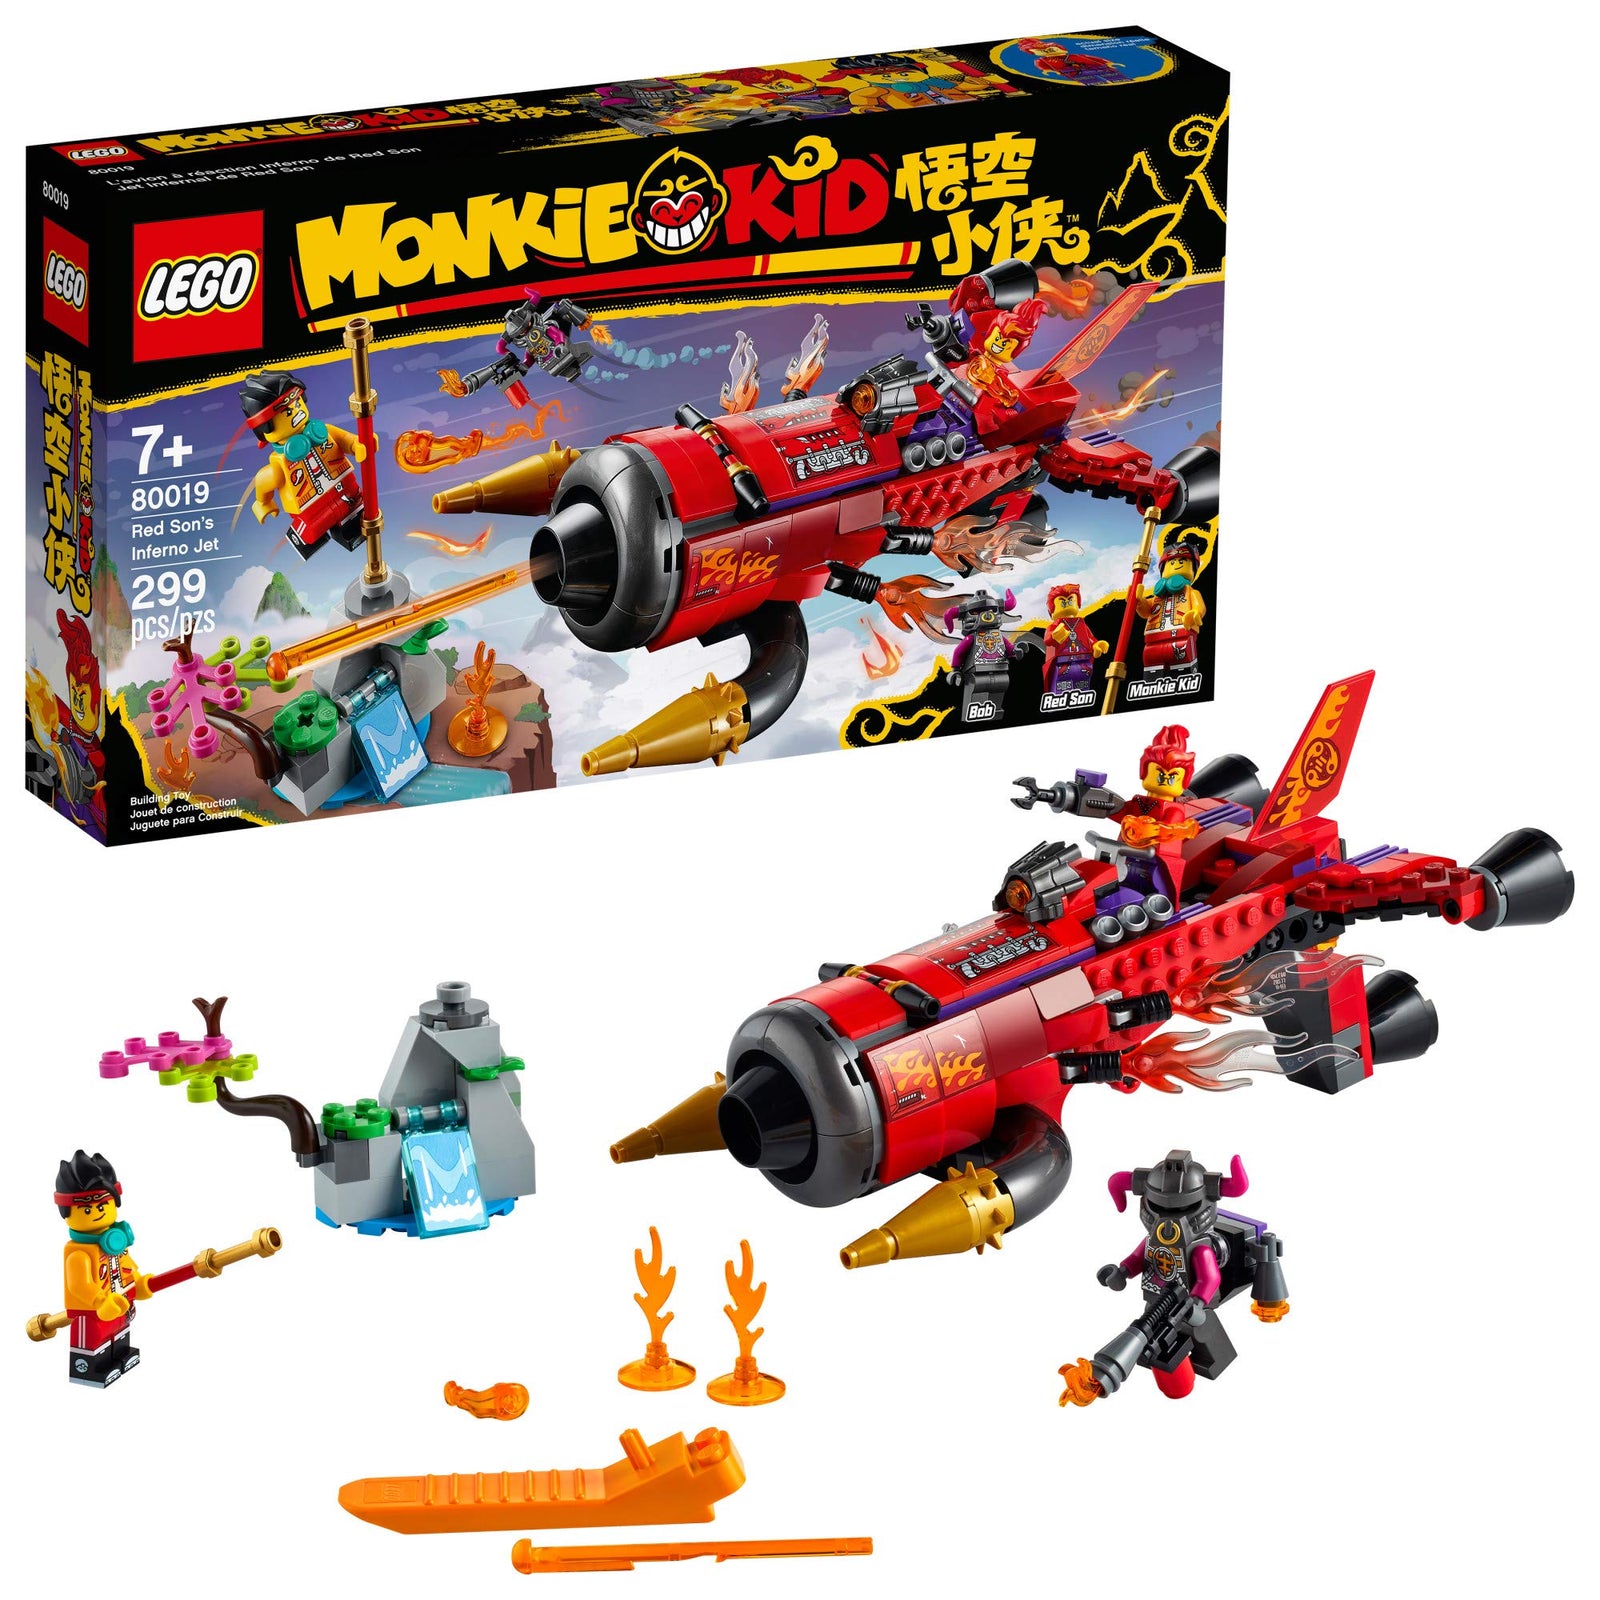 LEGO Monkie Kid Red Son’s Inferno Jet 80019 Building Kit (299 Pieces)